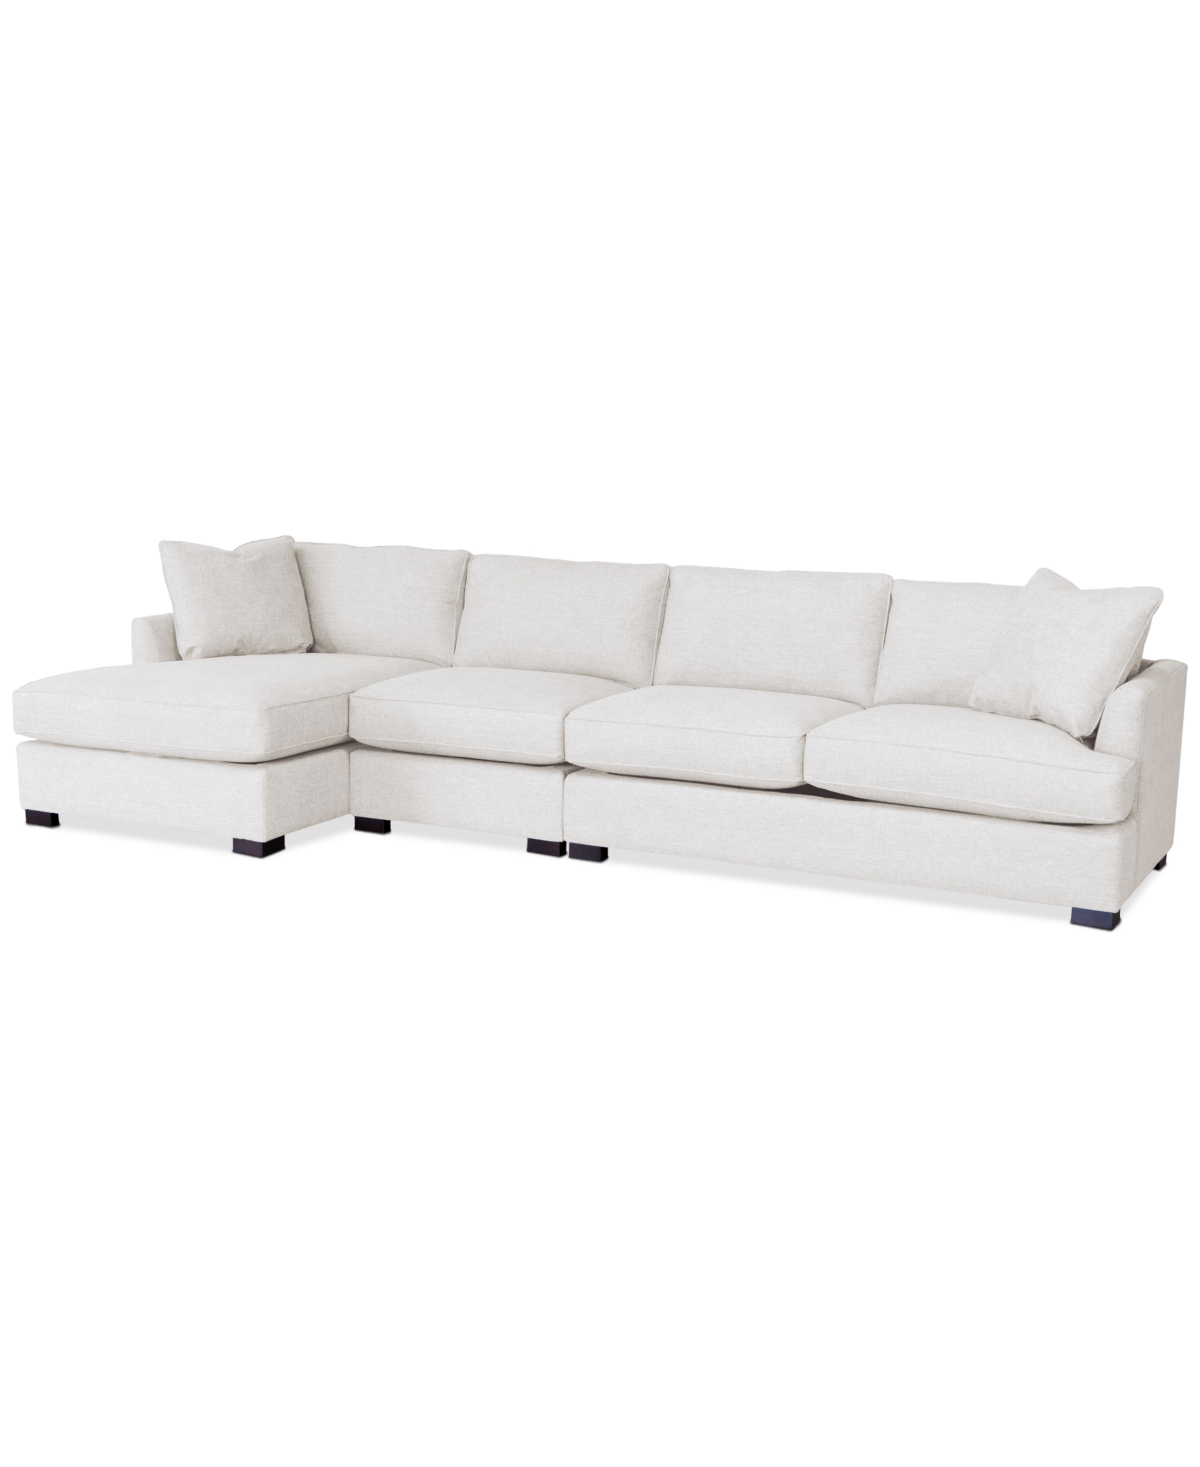 Furniture Nightford 146" 3-pc. Fabric Chaise Sectional, Created For Macy's In Dove